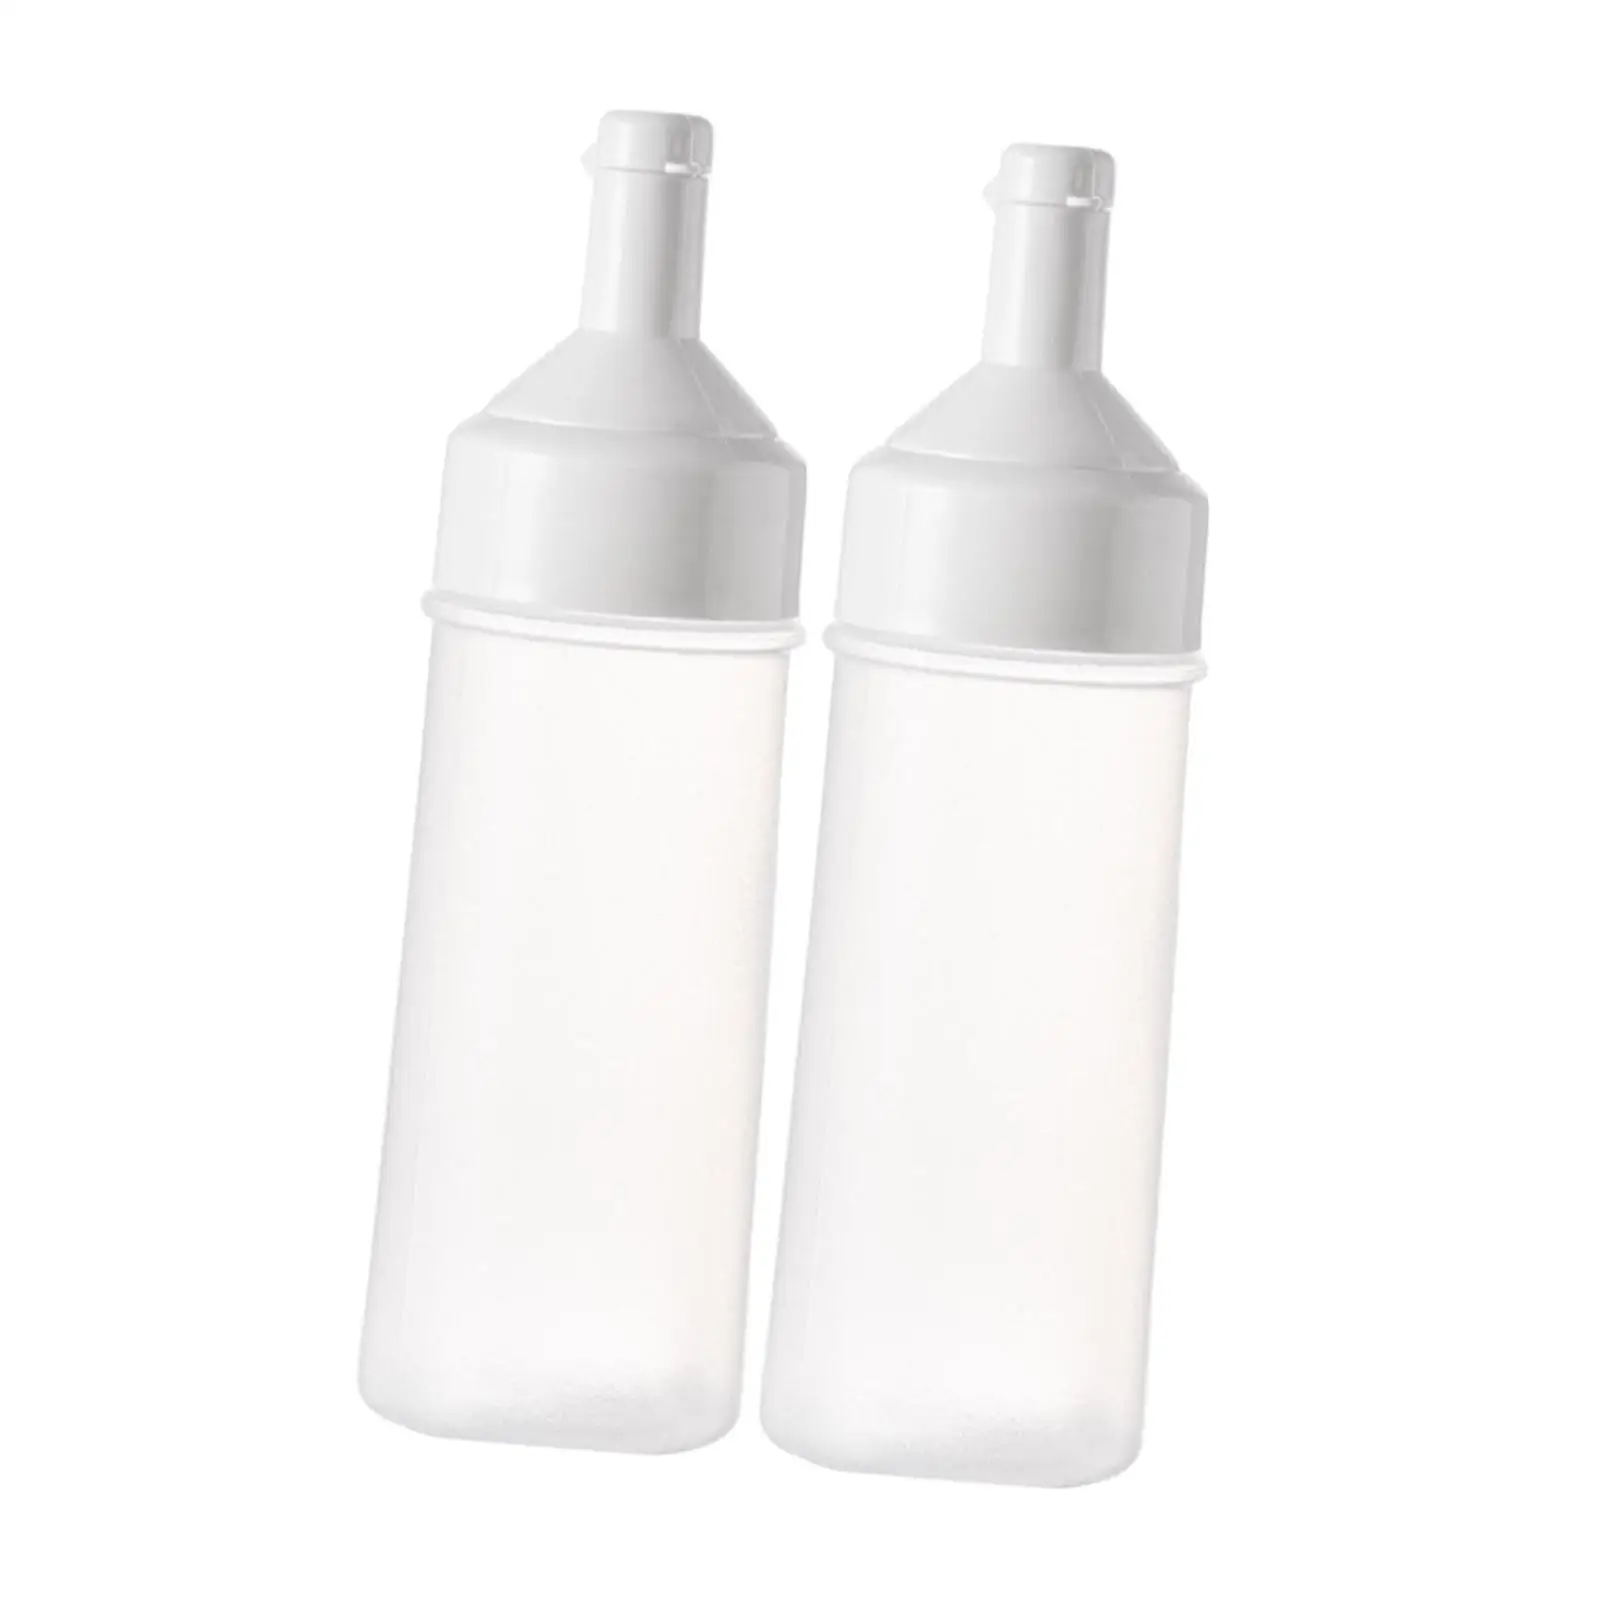 2x Condiment Dispenser Empty Devices Utensils Portable Container Squirt Salad Dressing Bottle for Outdoor Kitchen BBQ Traveling